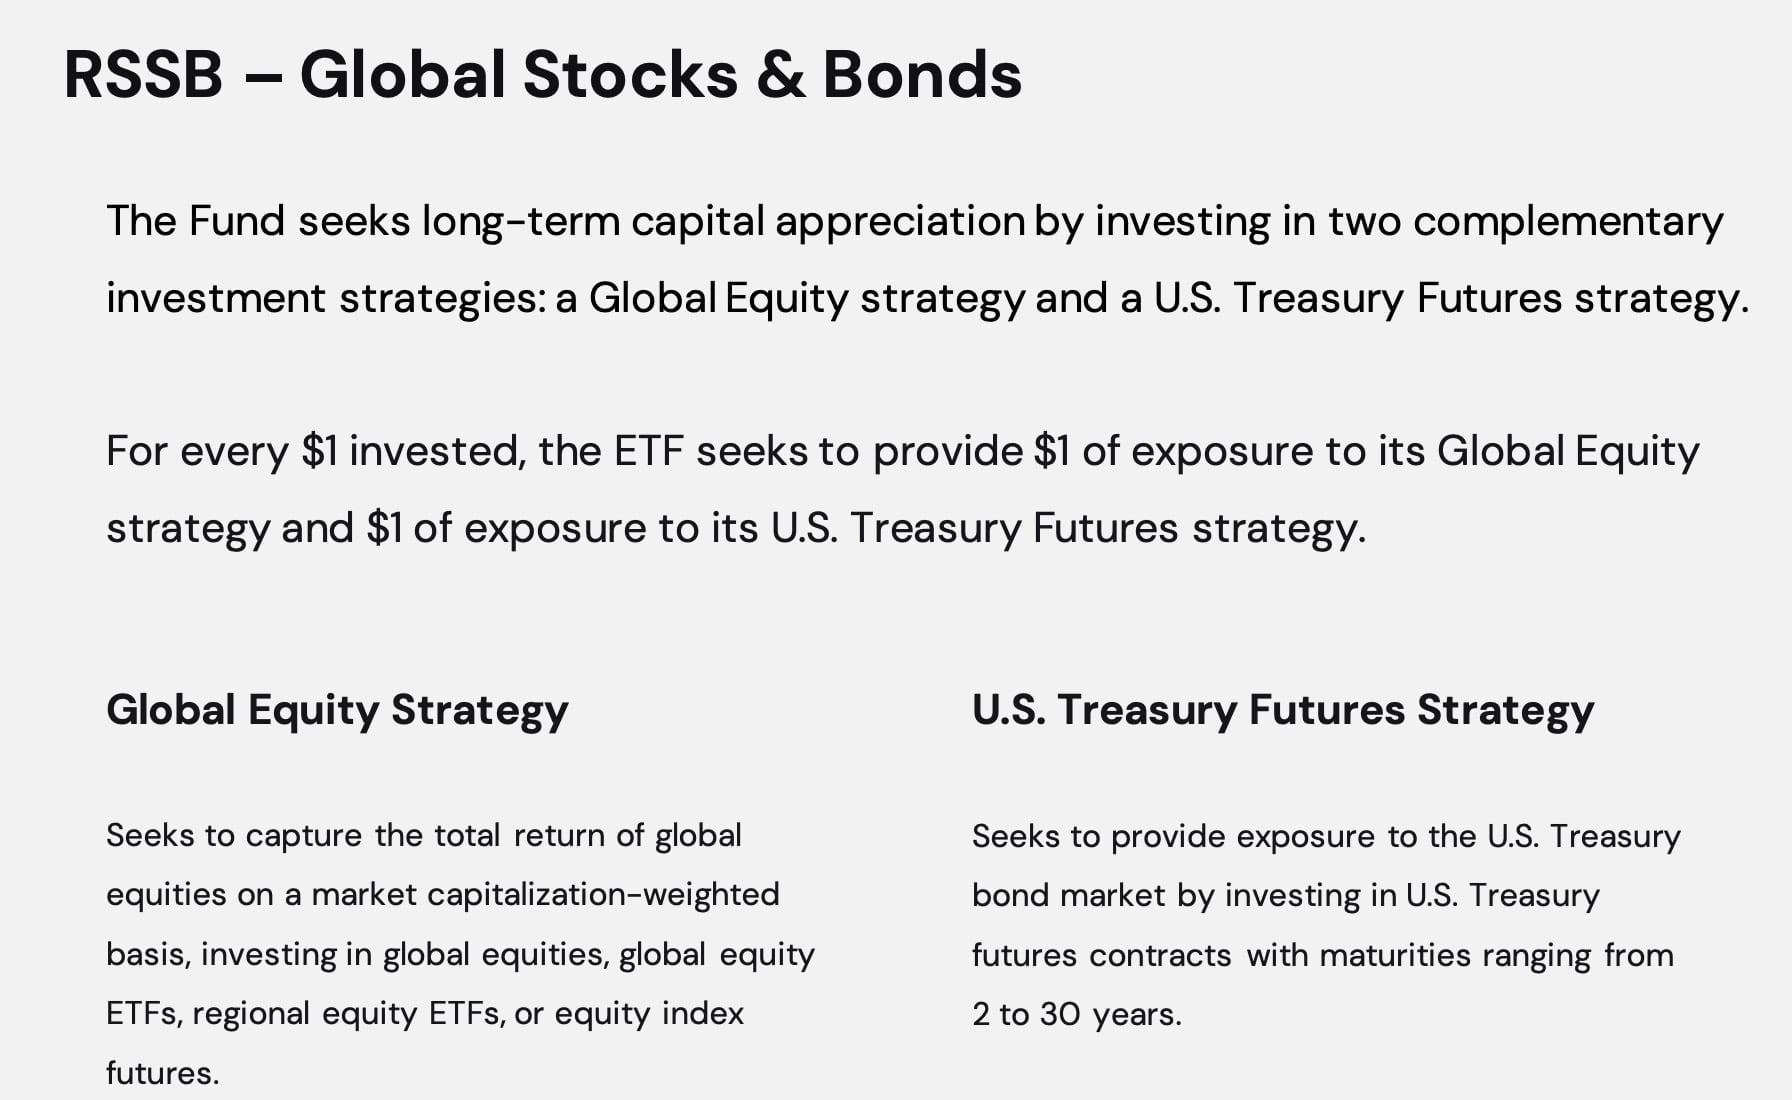 RSSB - Global Stocks and Bonds with a global equity strategy and US Treasury Futures Strategy 